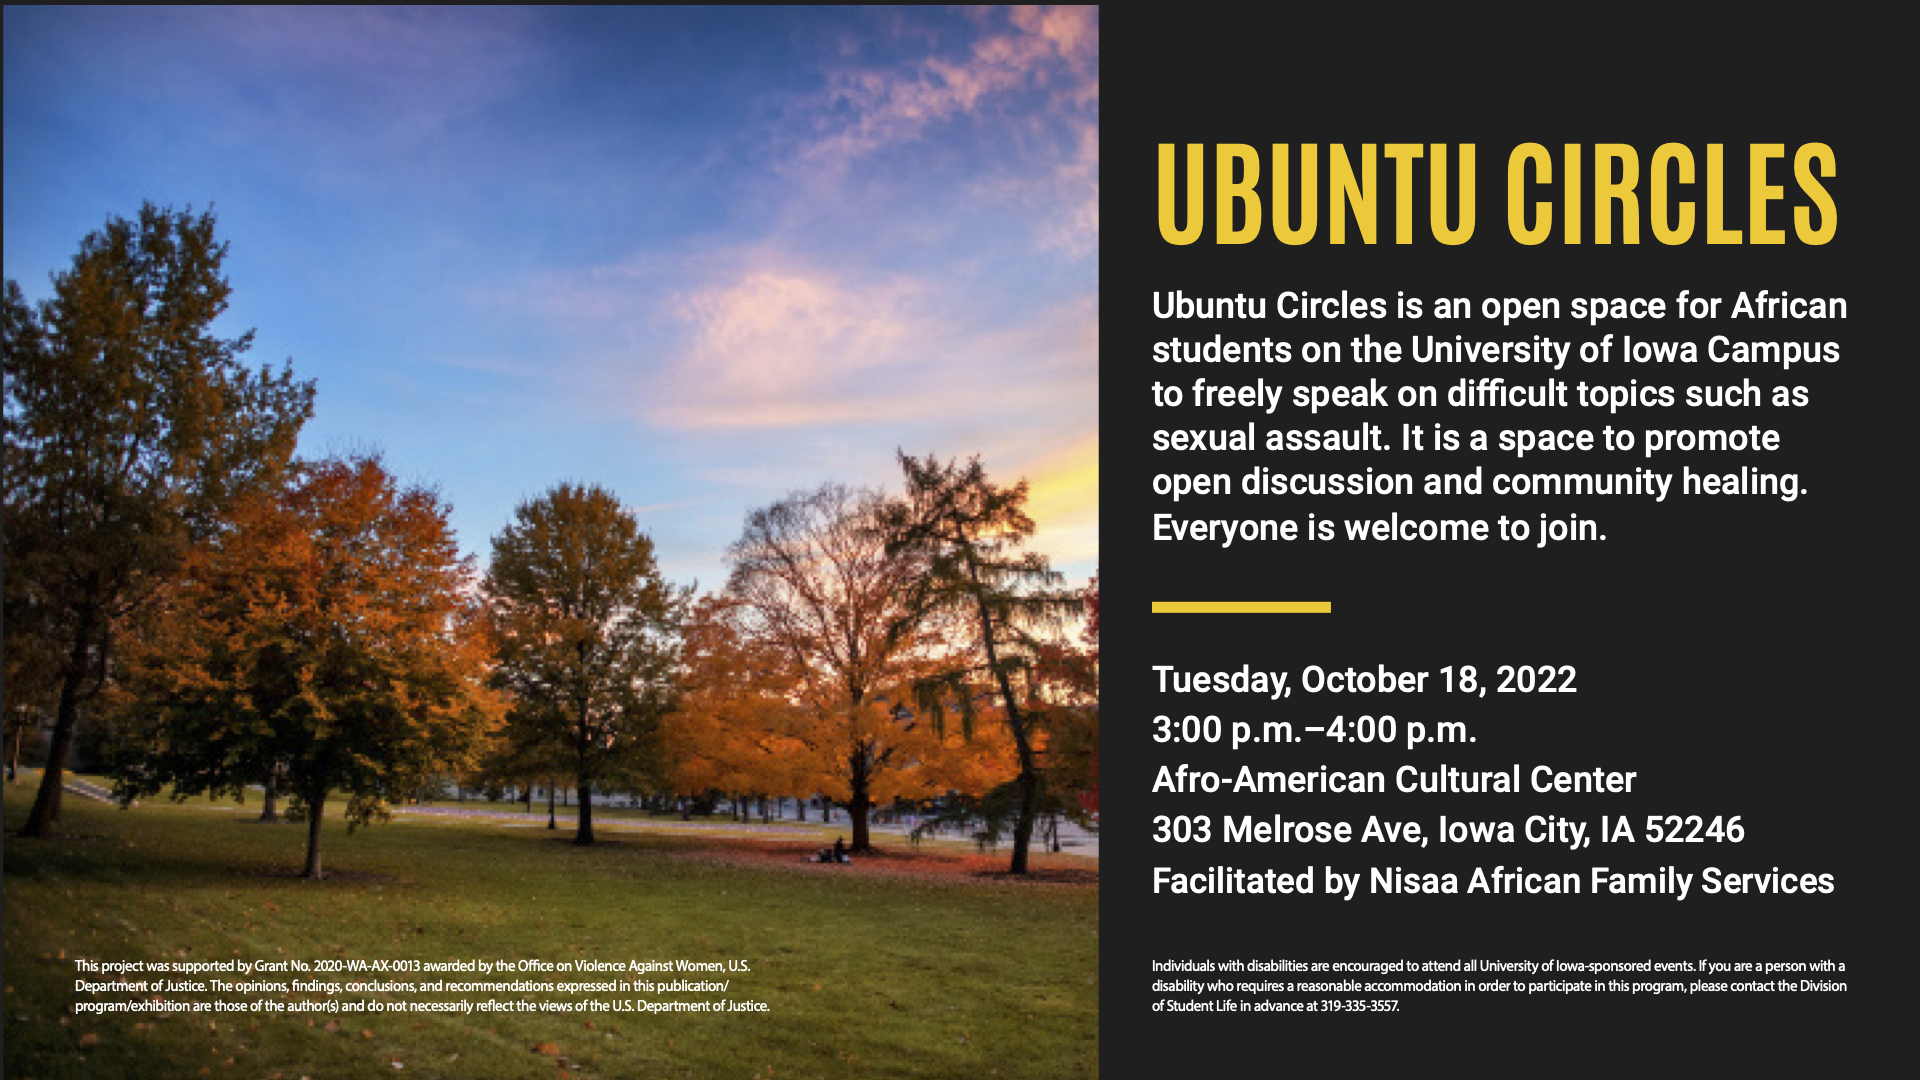 Ubuntu Circles is an open space for African students on the University of Iowa Campus to freely speak on difficult topics such as sexual assault. It is a space to promote open discussion and community healing. Everyone is welcome to join. Tuesday, October 18th, 2022 from 3-4pm at the Afro-American Cultural Center. 303 Melrose Ave, Iowa City, IA 52246 Facilitated by Nisaa African Family Services